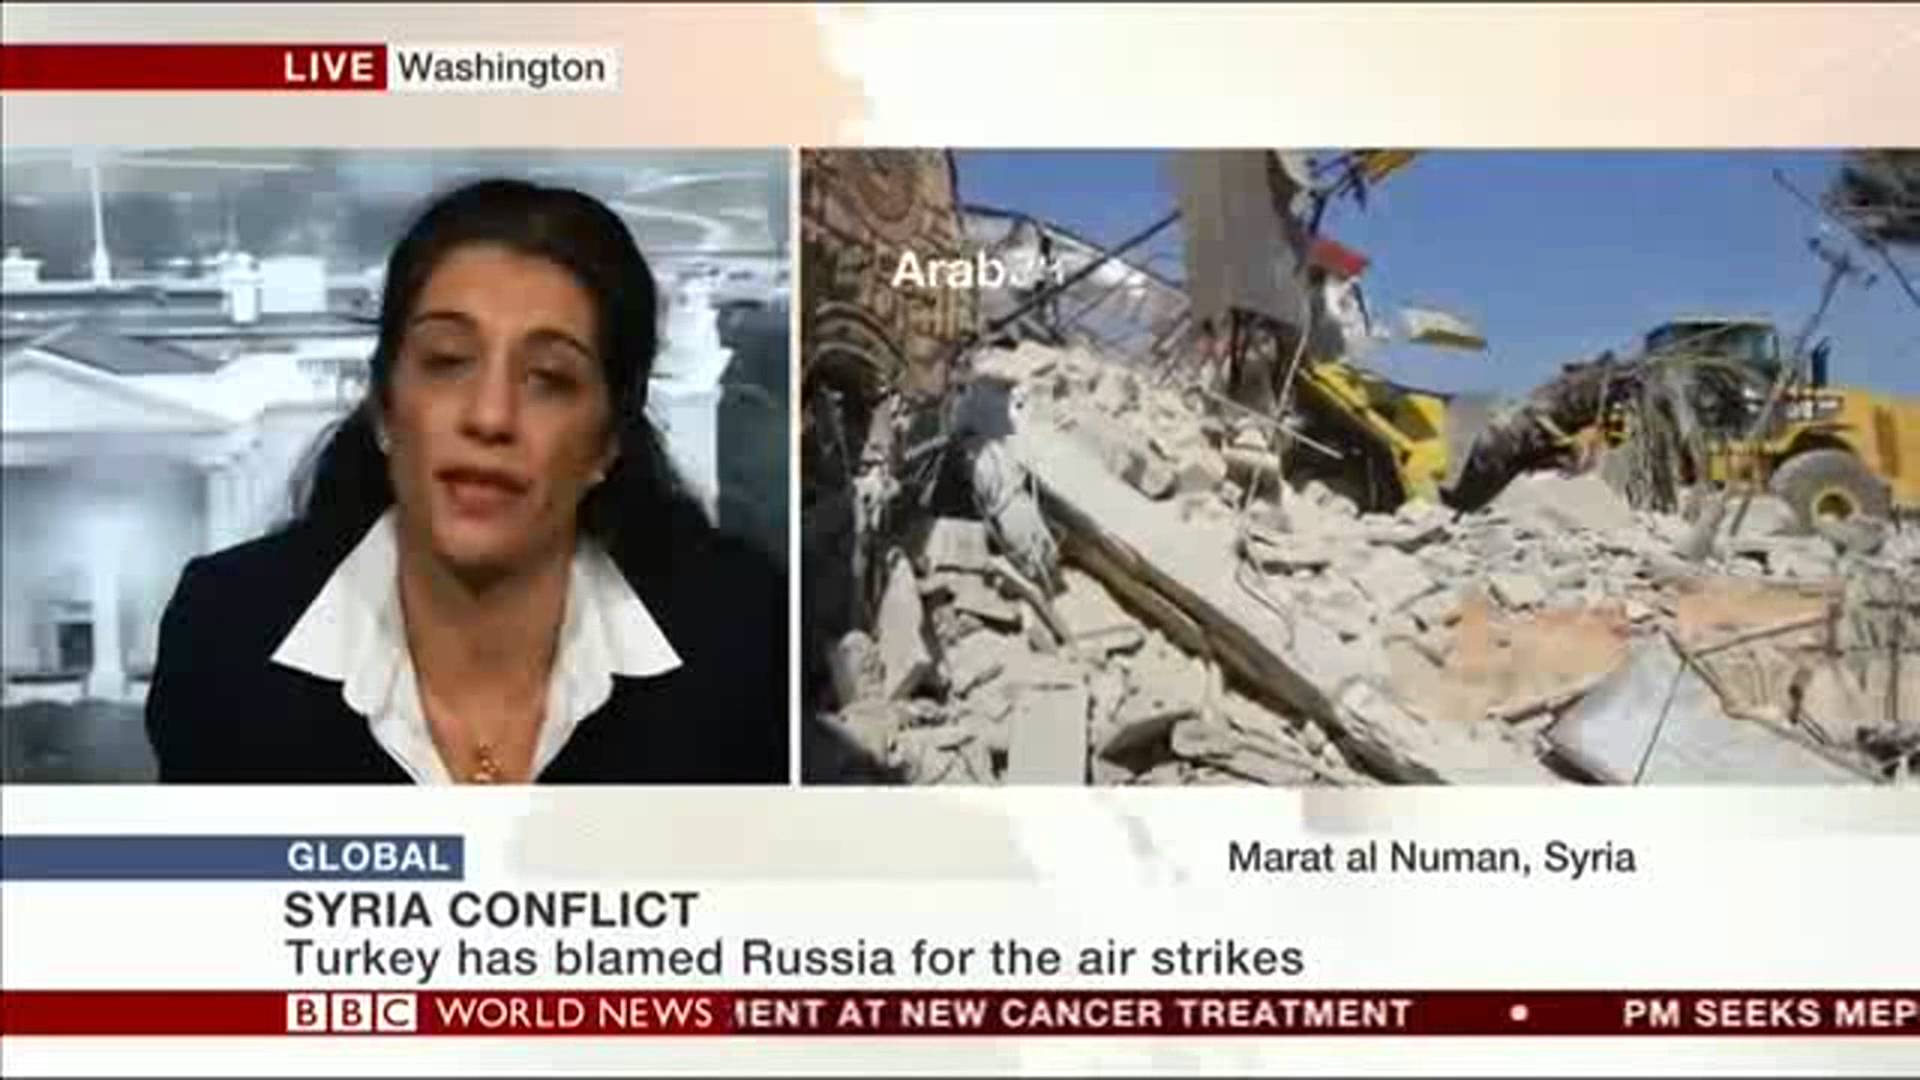 Sanam Naraghi-Anderlini speaks to BBC World News about the Syrian conflict